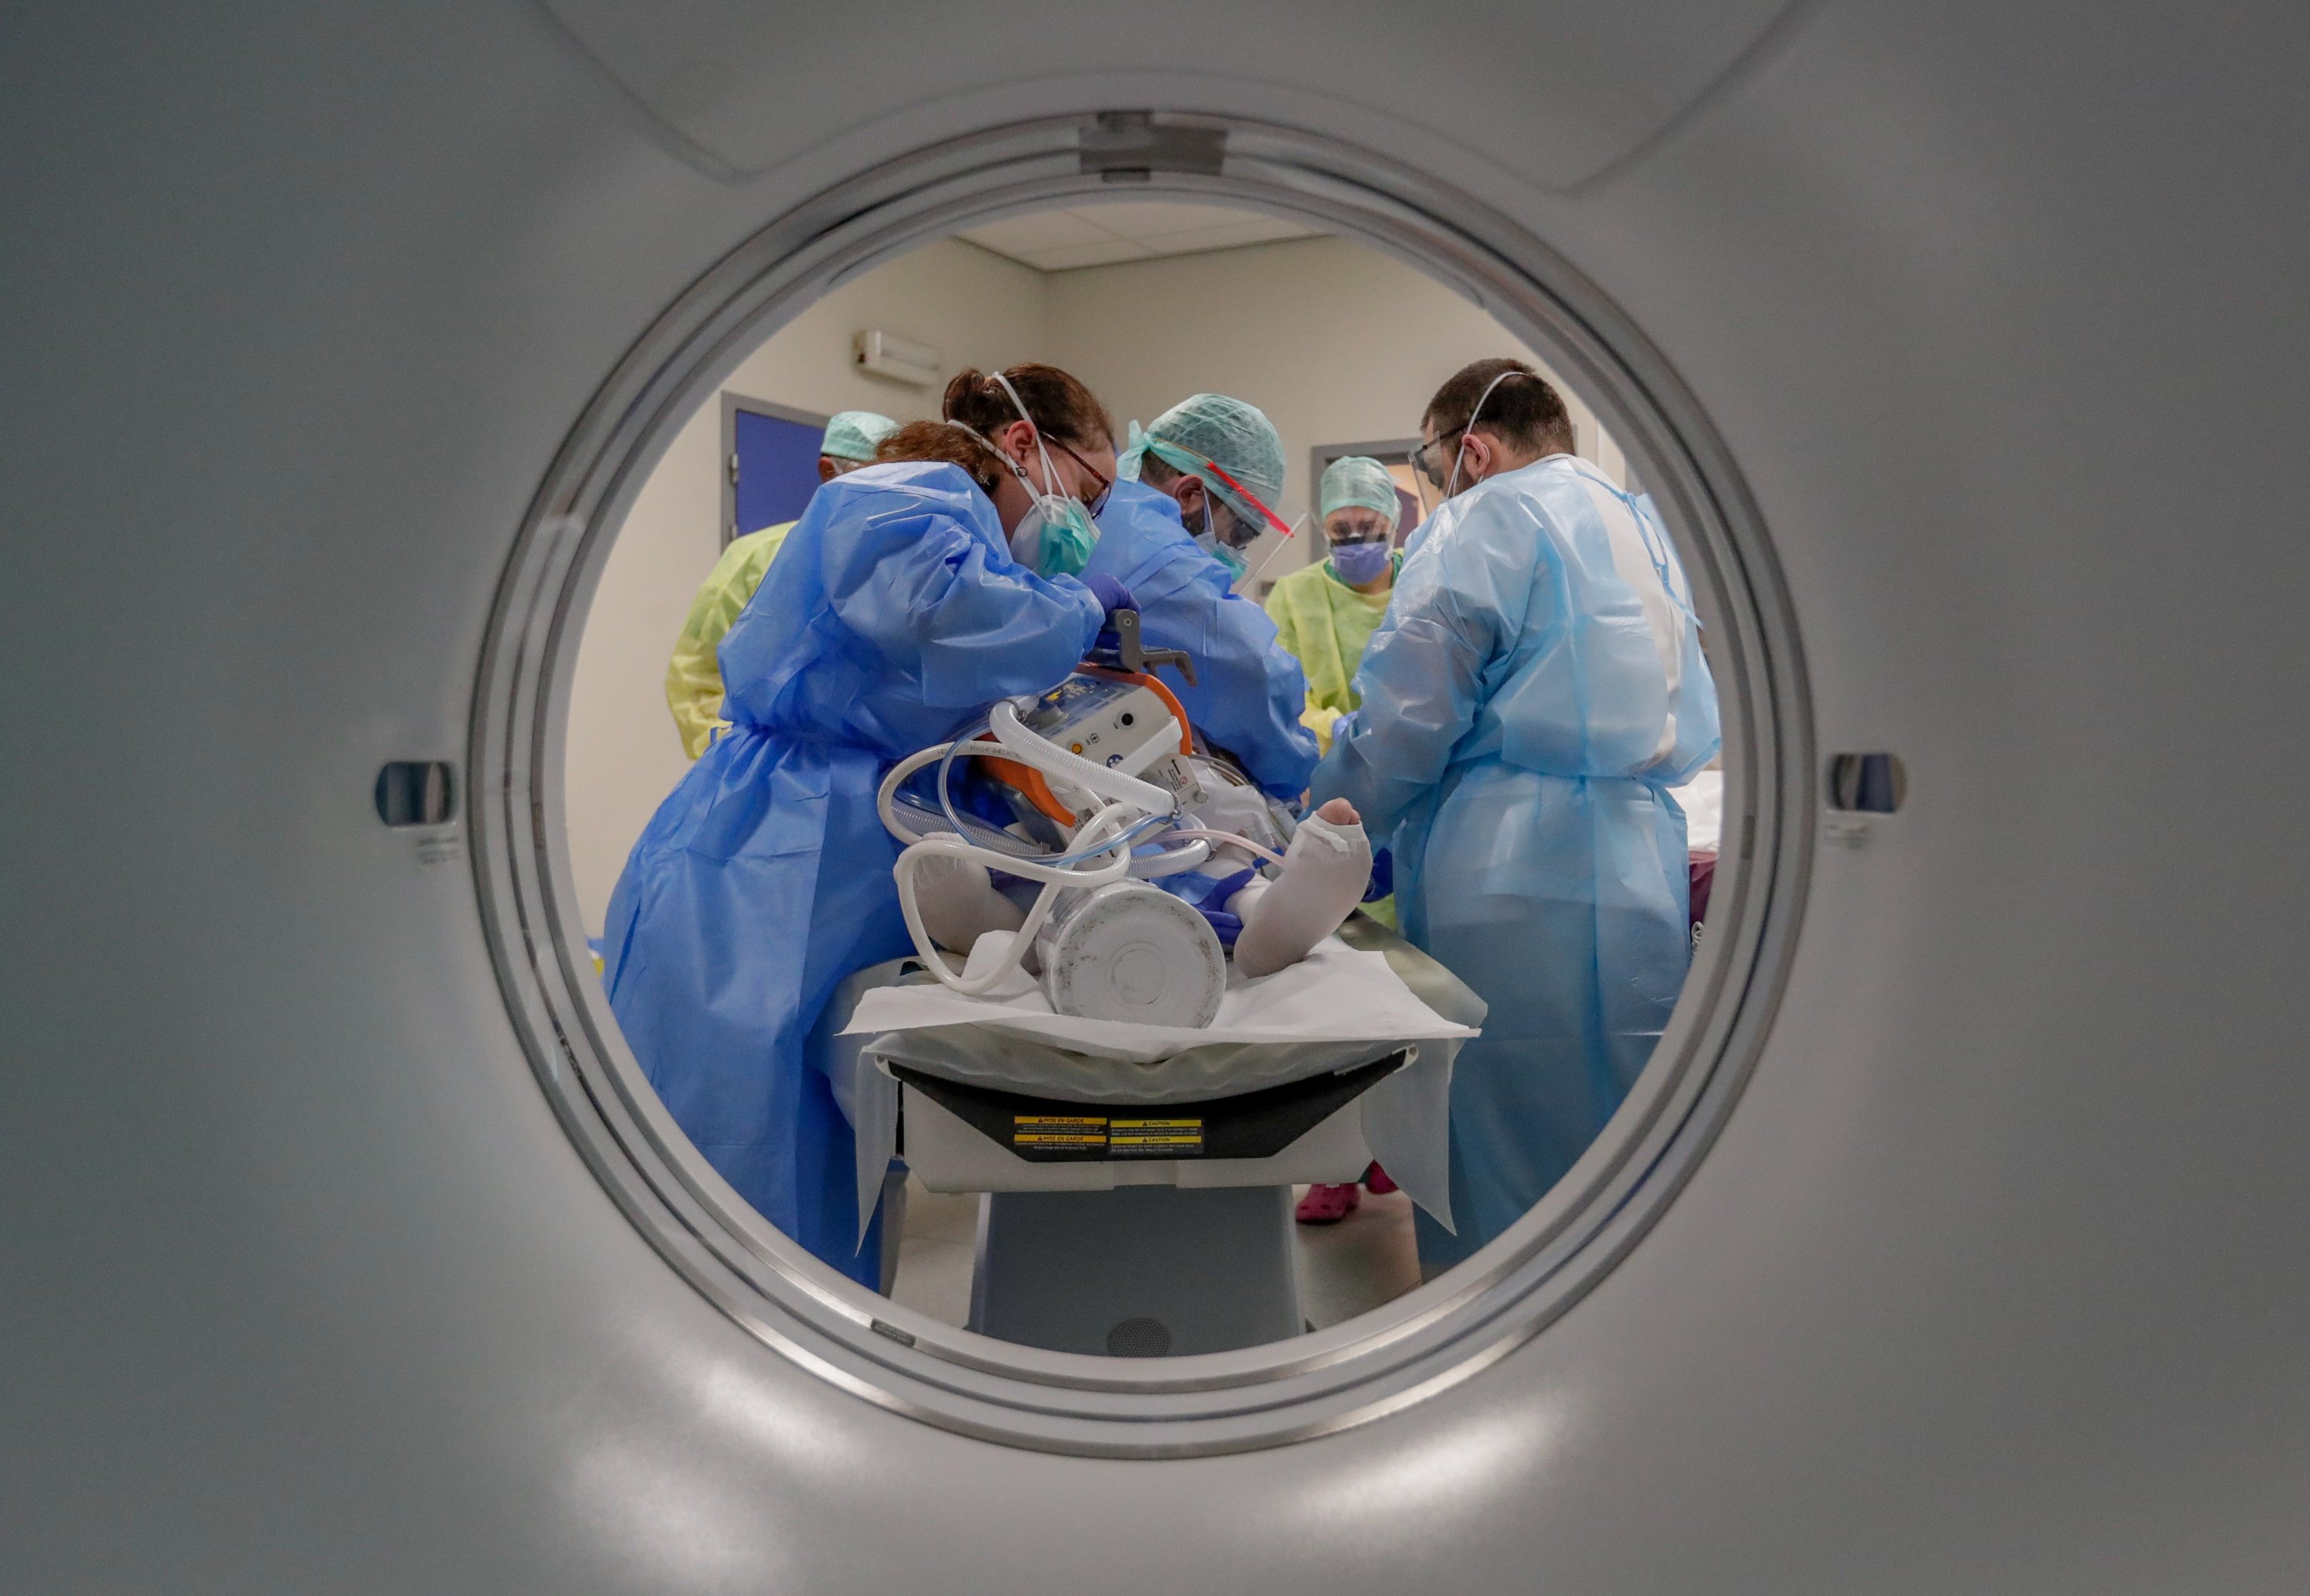 A COVID-19 patient is cared for by the nursing staff in order to perform a lung scan at the Etterbeek-Ixelles site of the Iris Sud Hospitals in Brussels, Belgium, April 29, 2020. (EPA Photo)